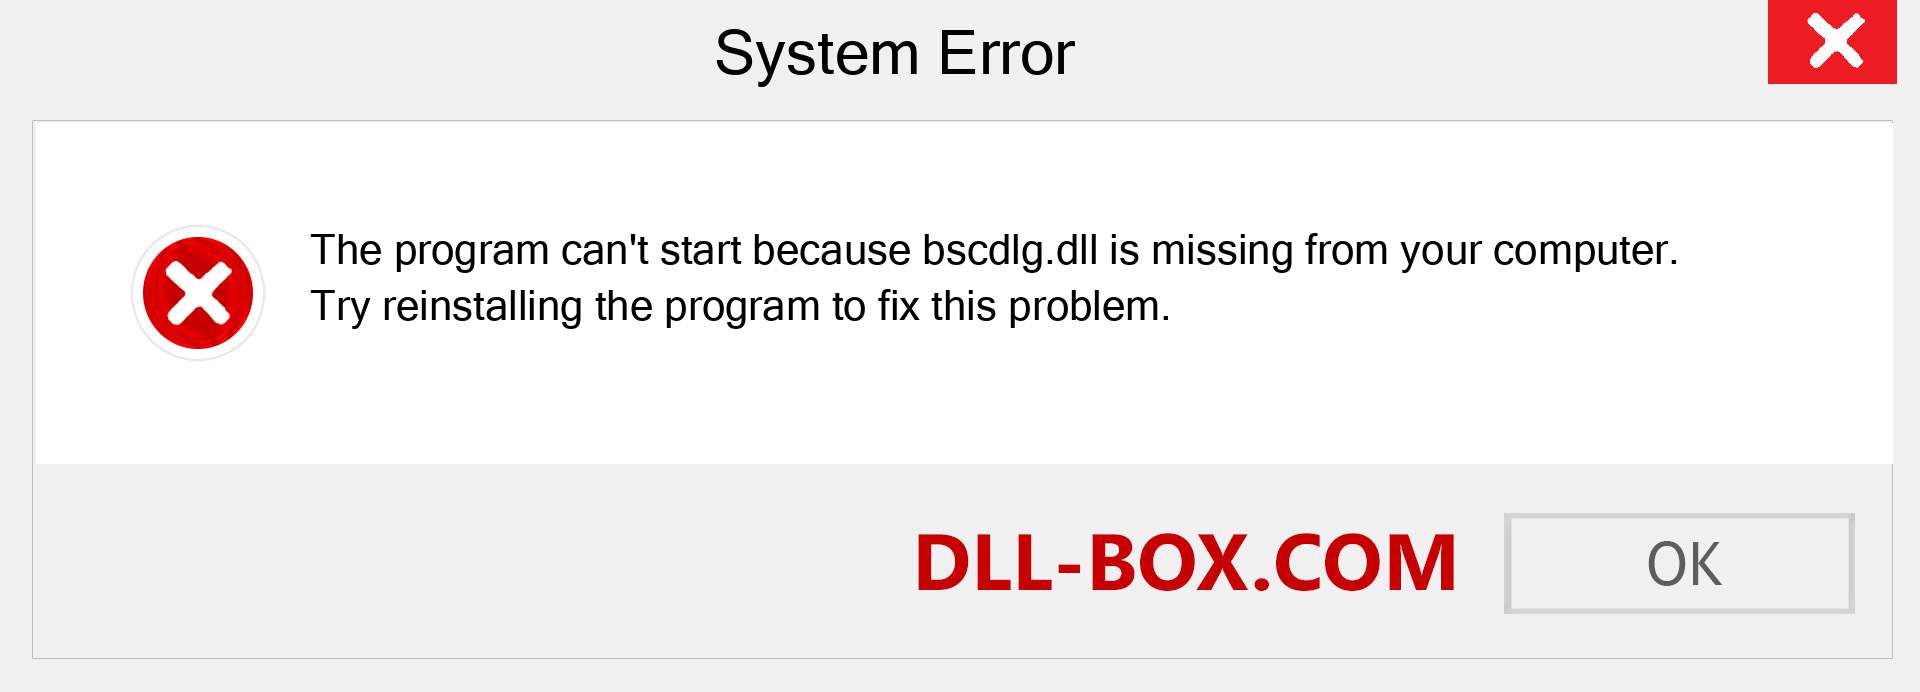  bscdlg.dll file is missing?. Download for Windows 7, 8, 10 - Fix  bscdlg dll Missing Error on Windows, photos, images